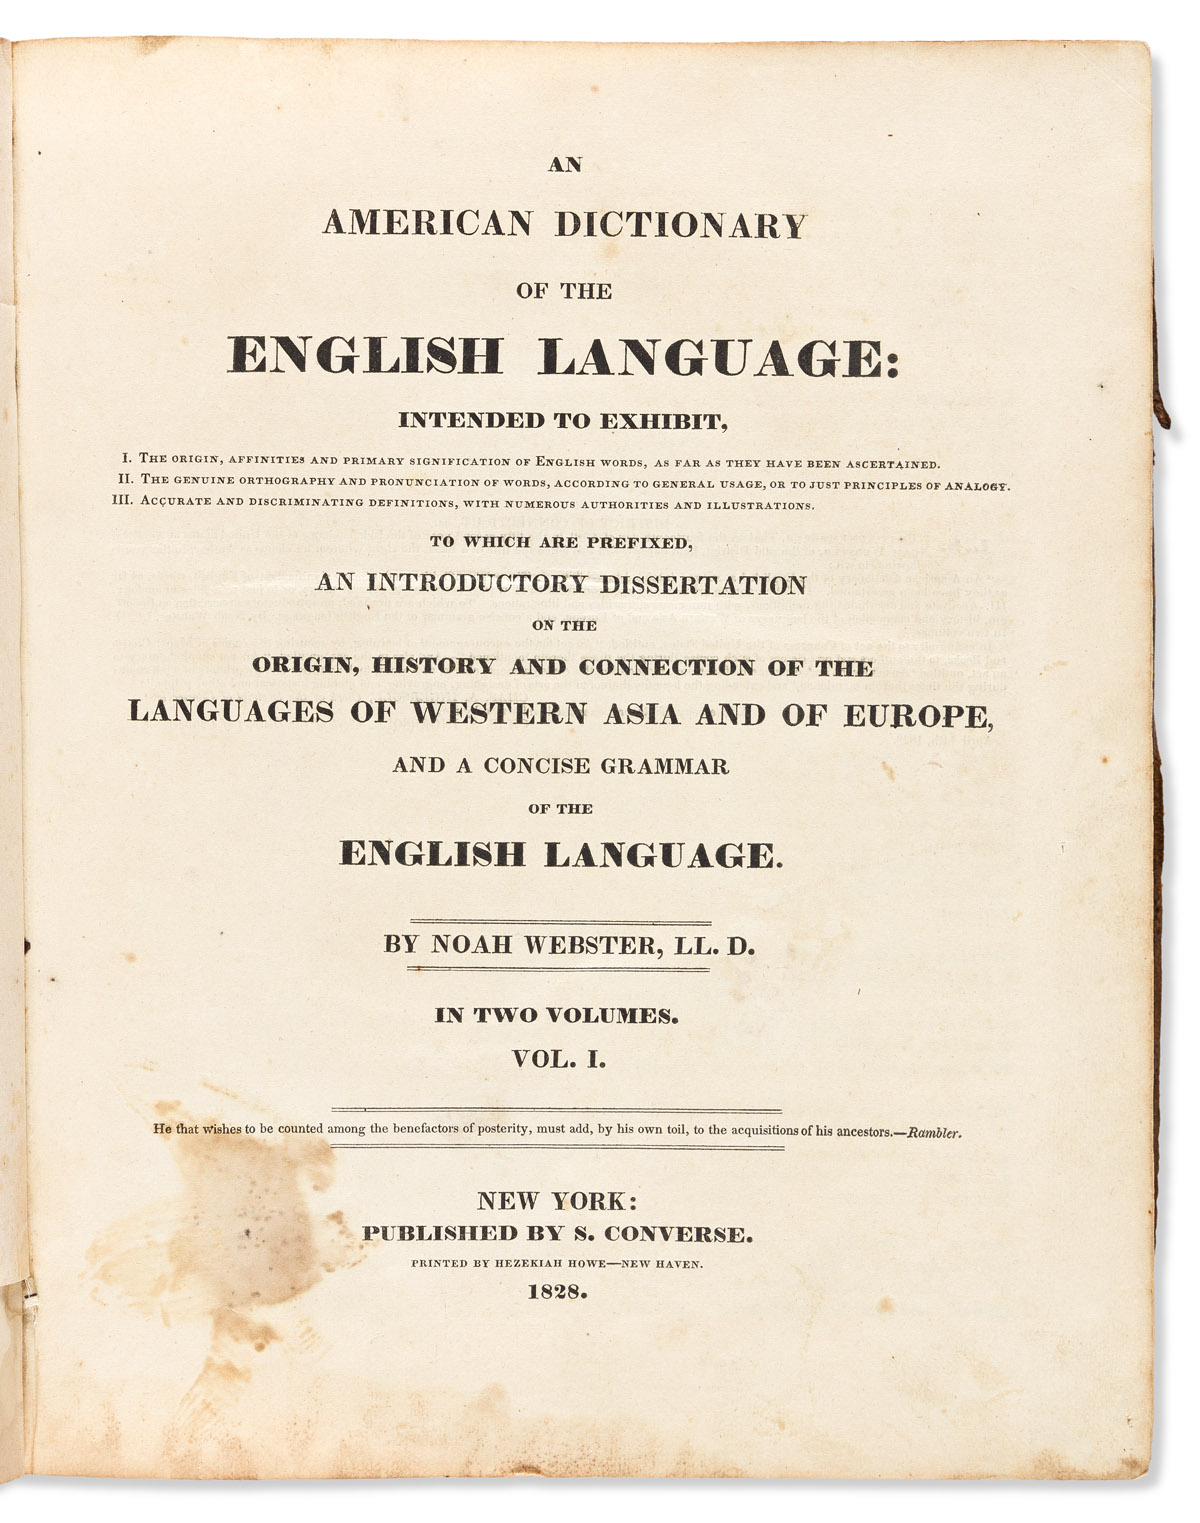 NOAH WEBSTER. An American Dictionary of the English Language.